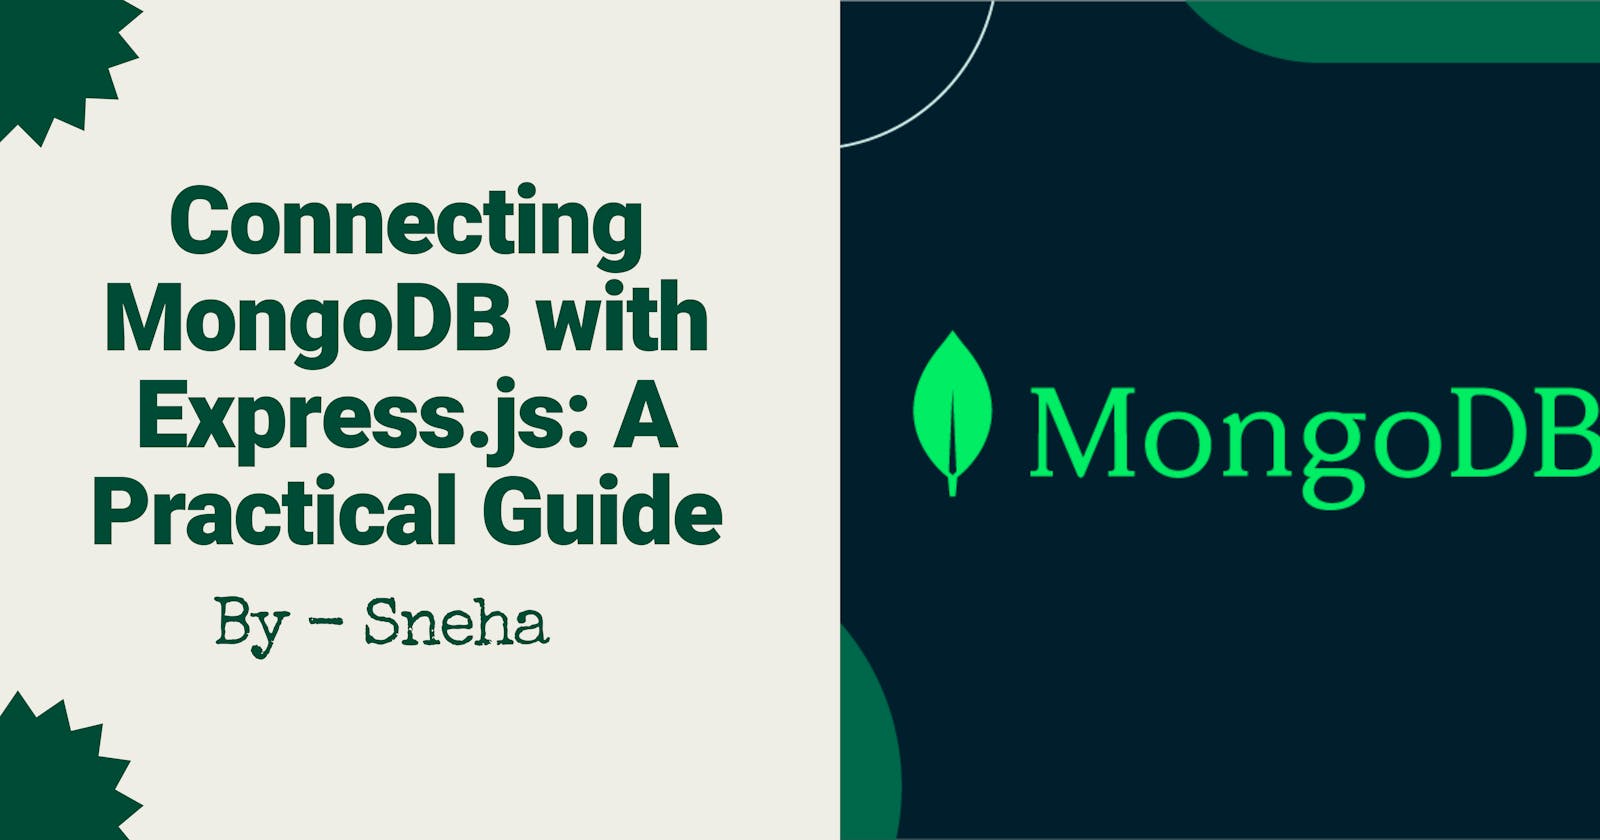 Connecting MongoDB with Express.js: A Practical Guide